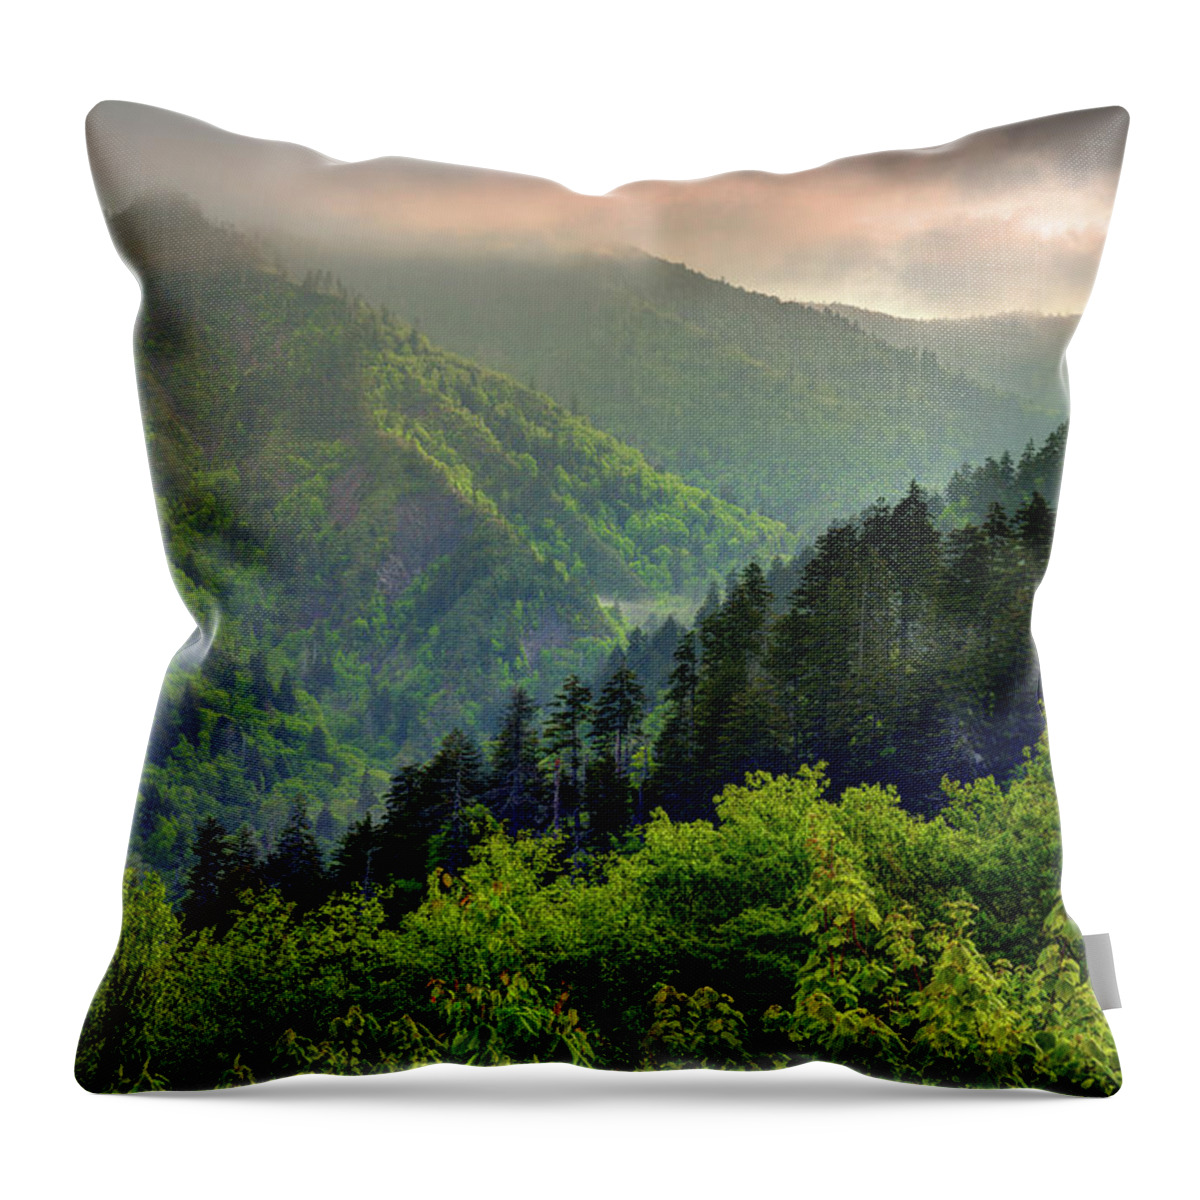 Smoky Mountains Throw Pillow featuring the photograph Into The Smokies by Mike Eingle